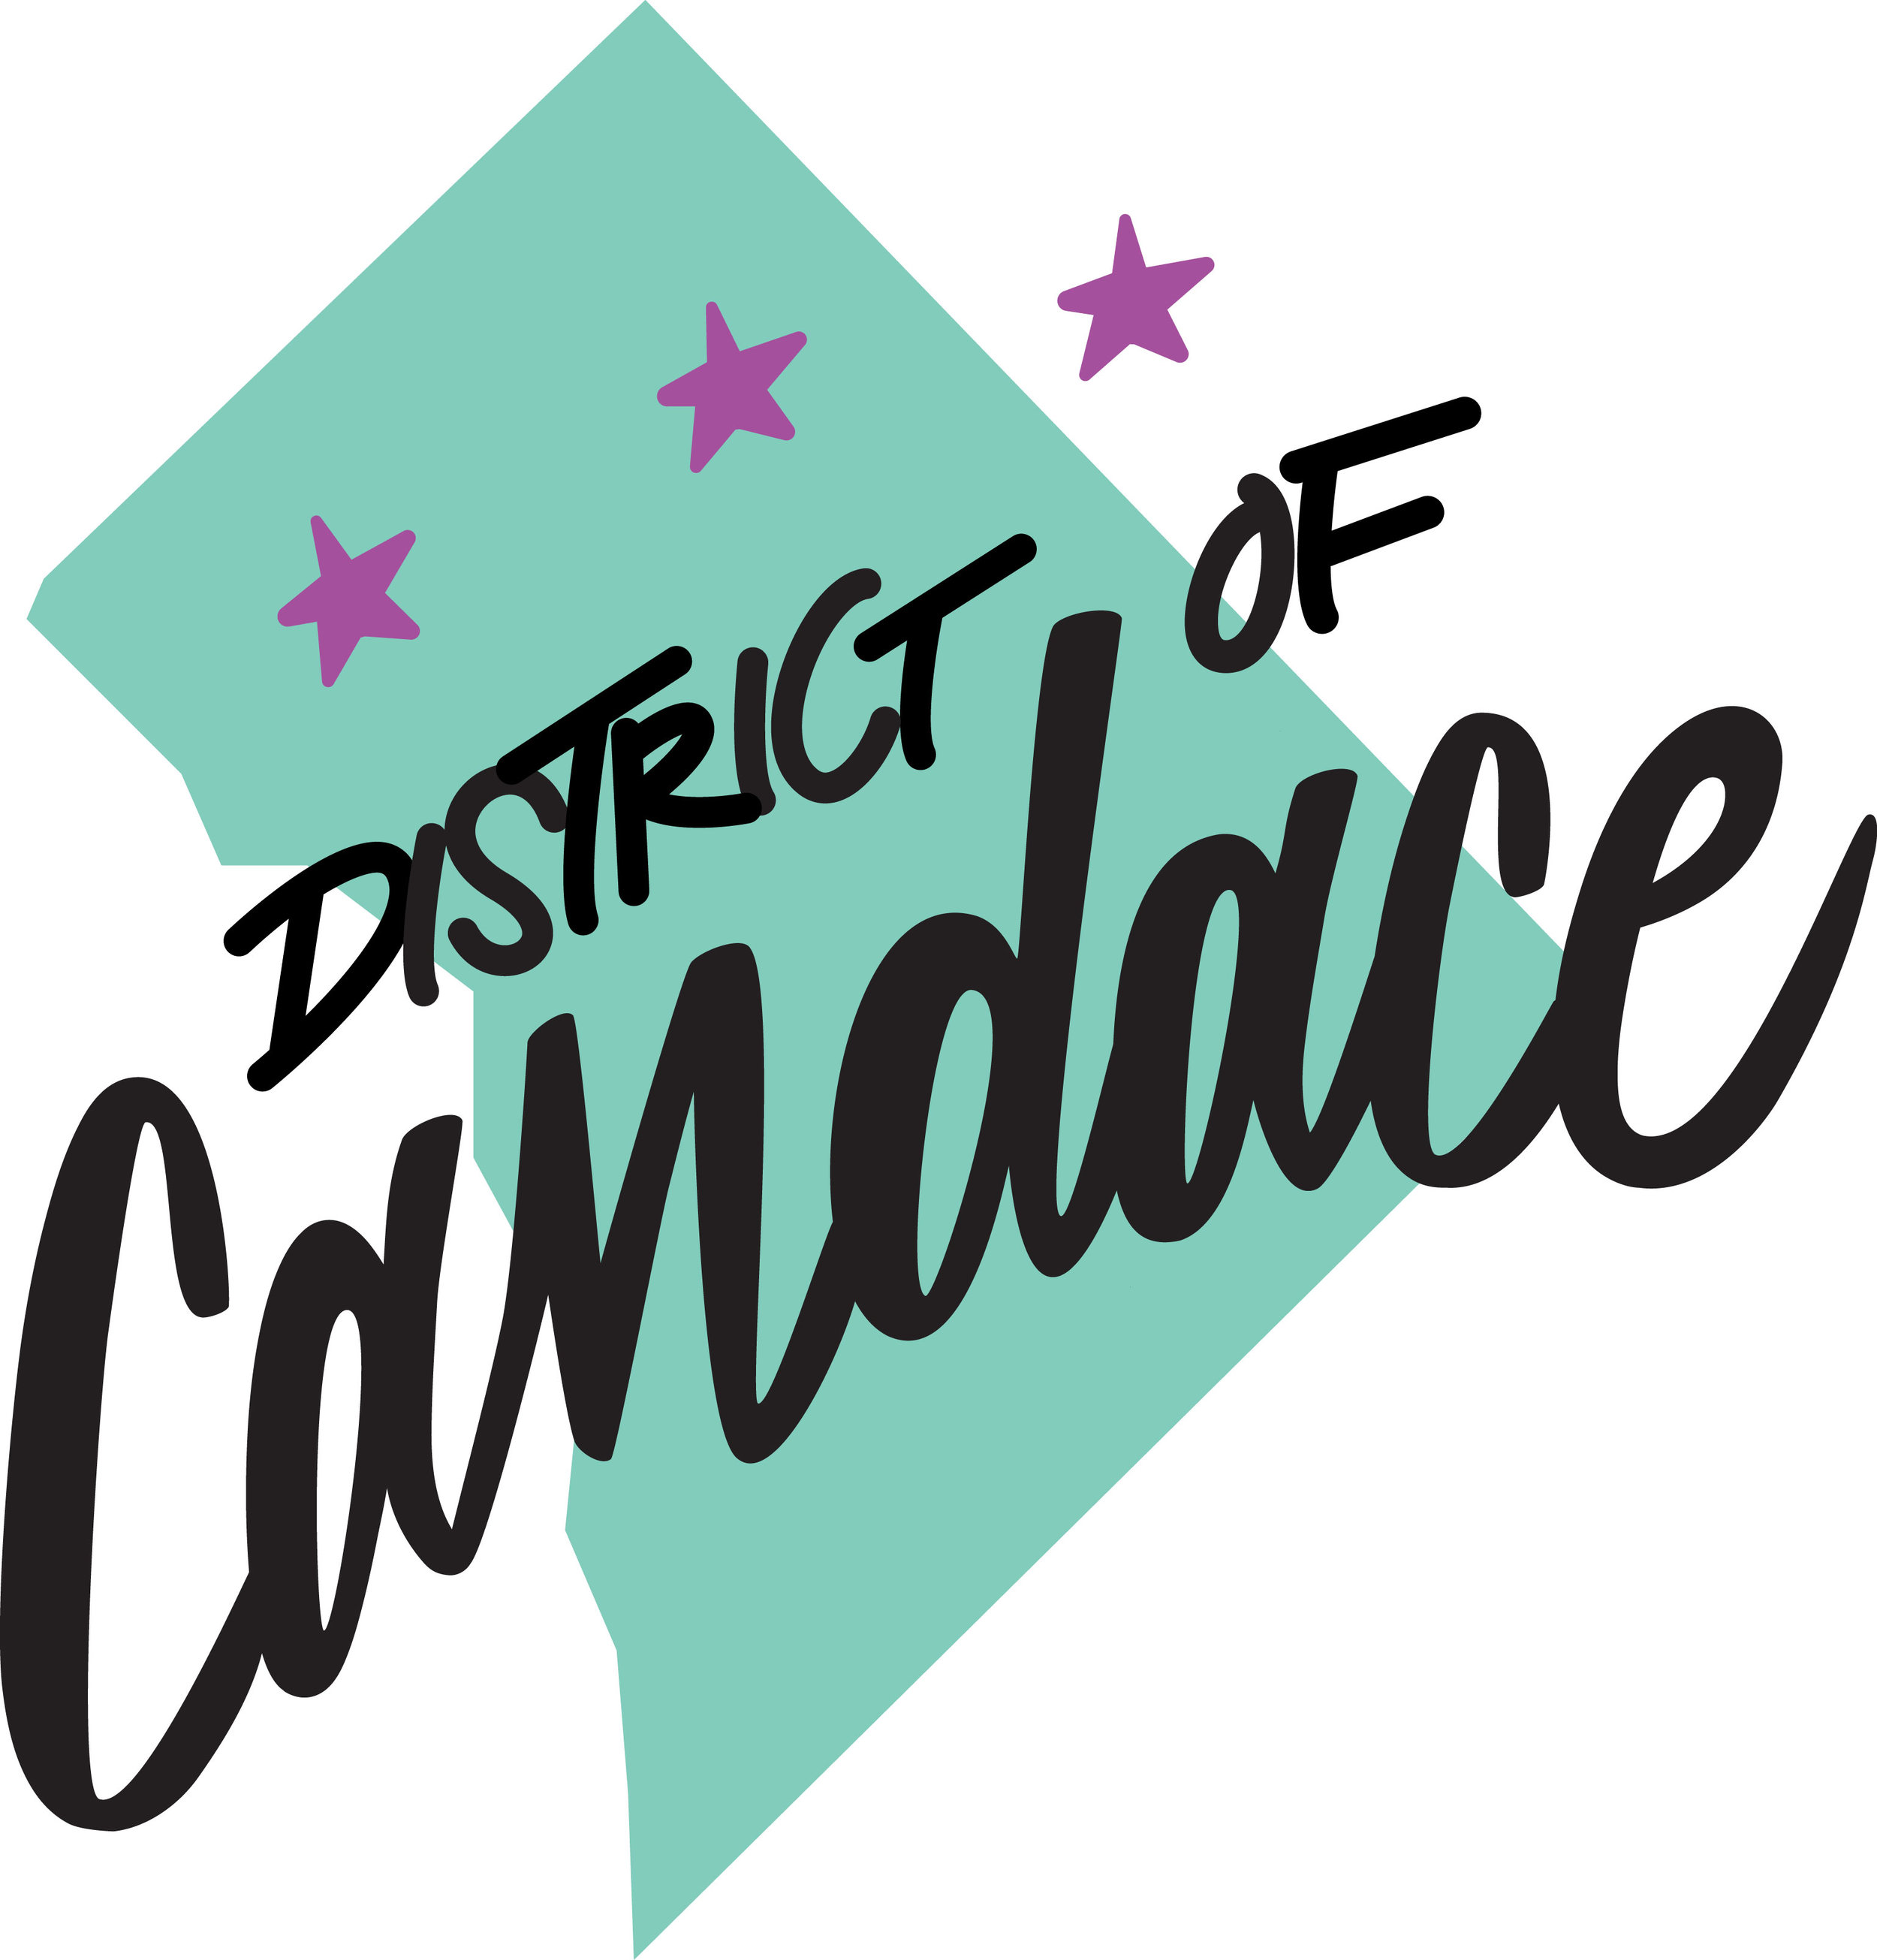 District of Candace